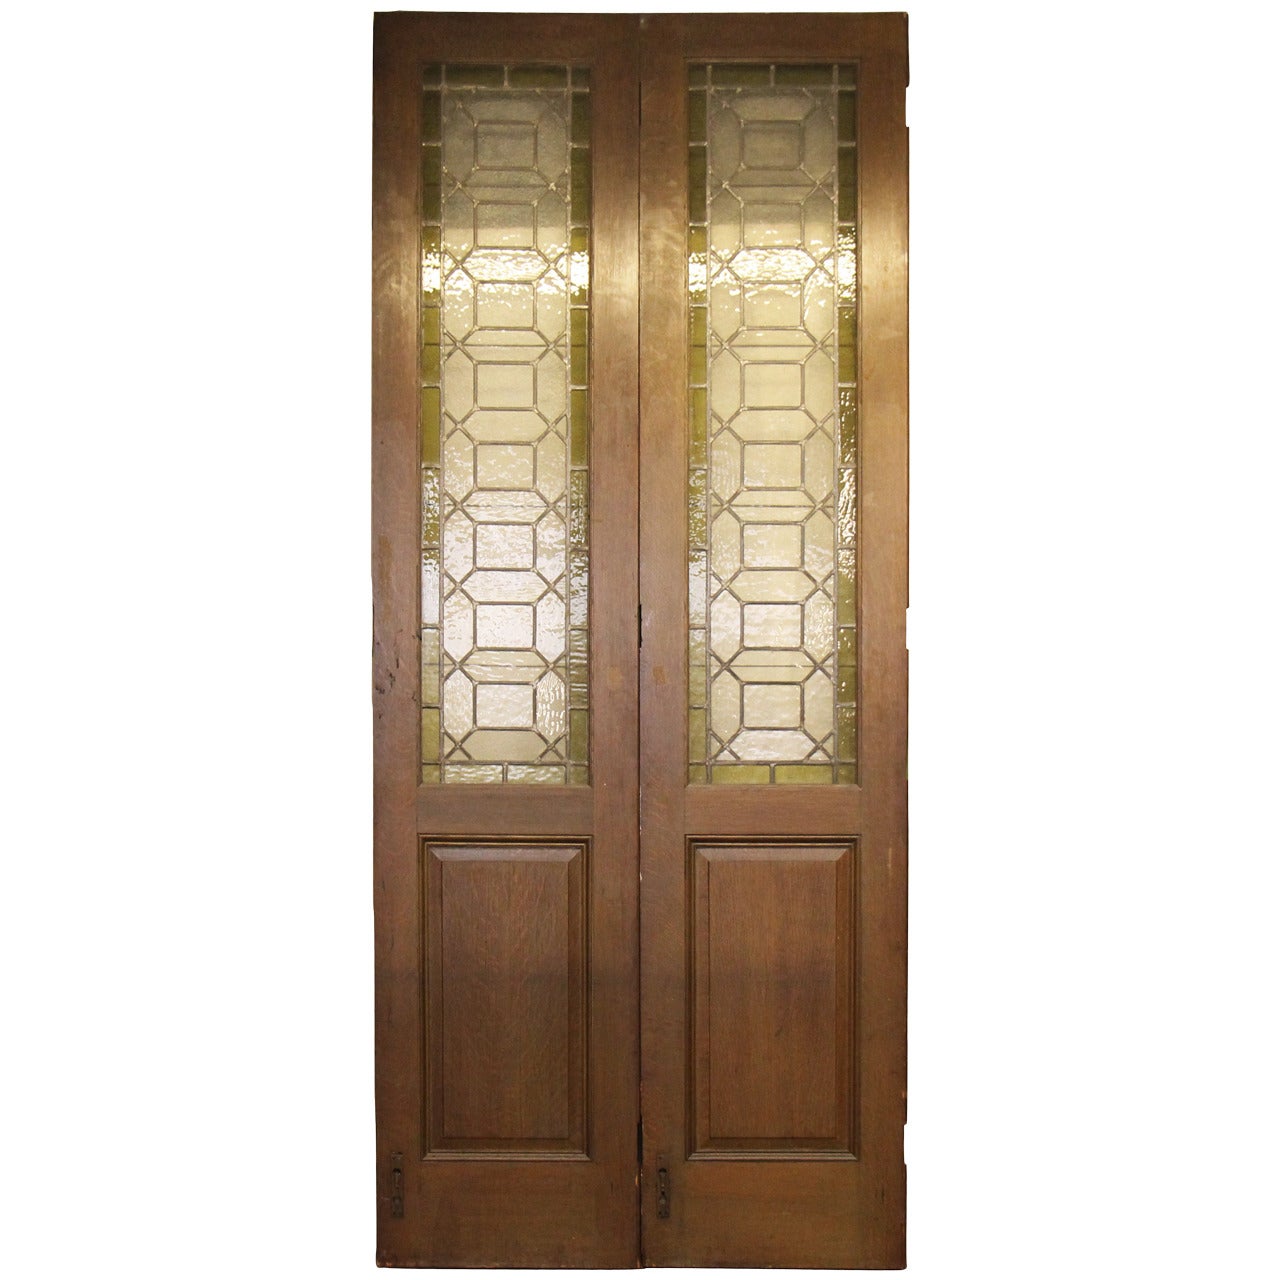 1907 Bifold Stained Glass Doors from Madison Avenue Baptist Church Parish House